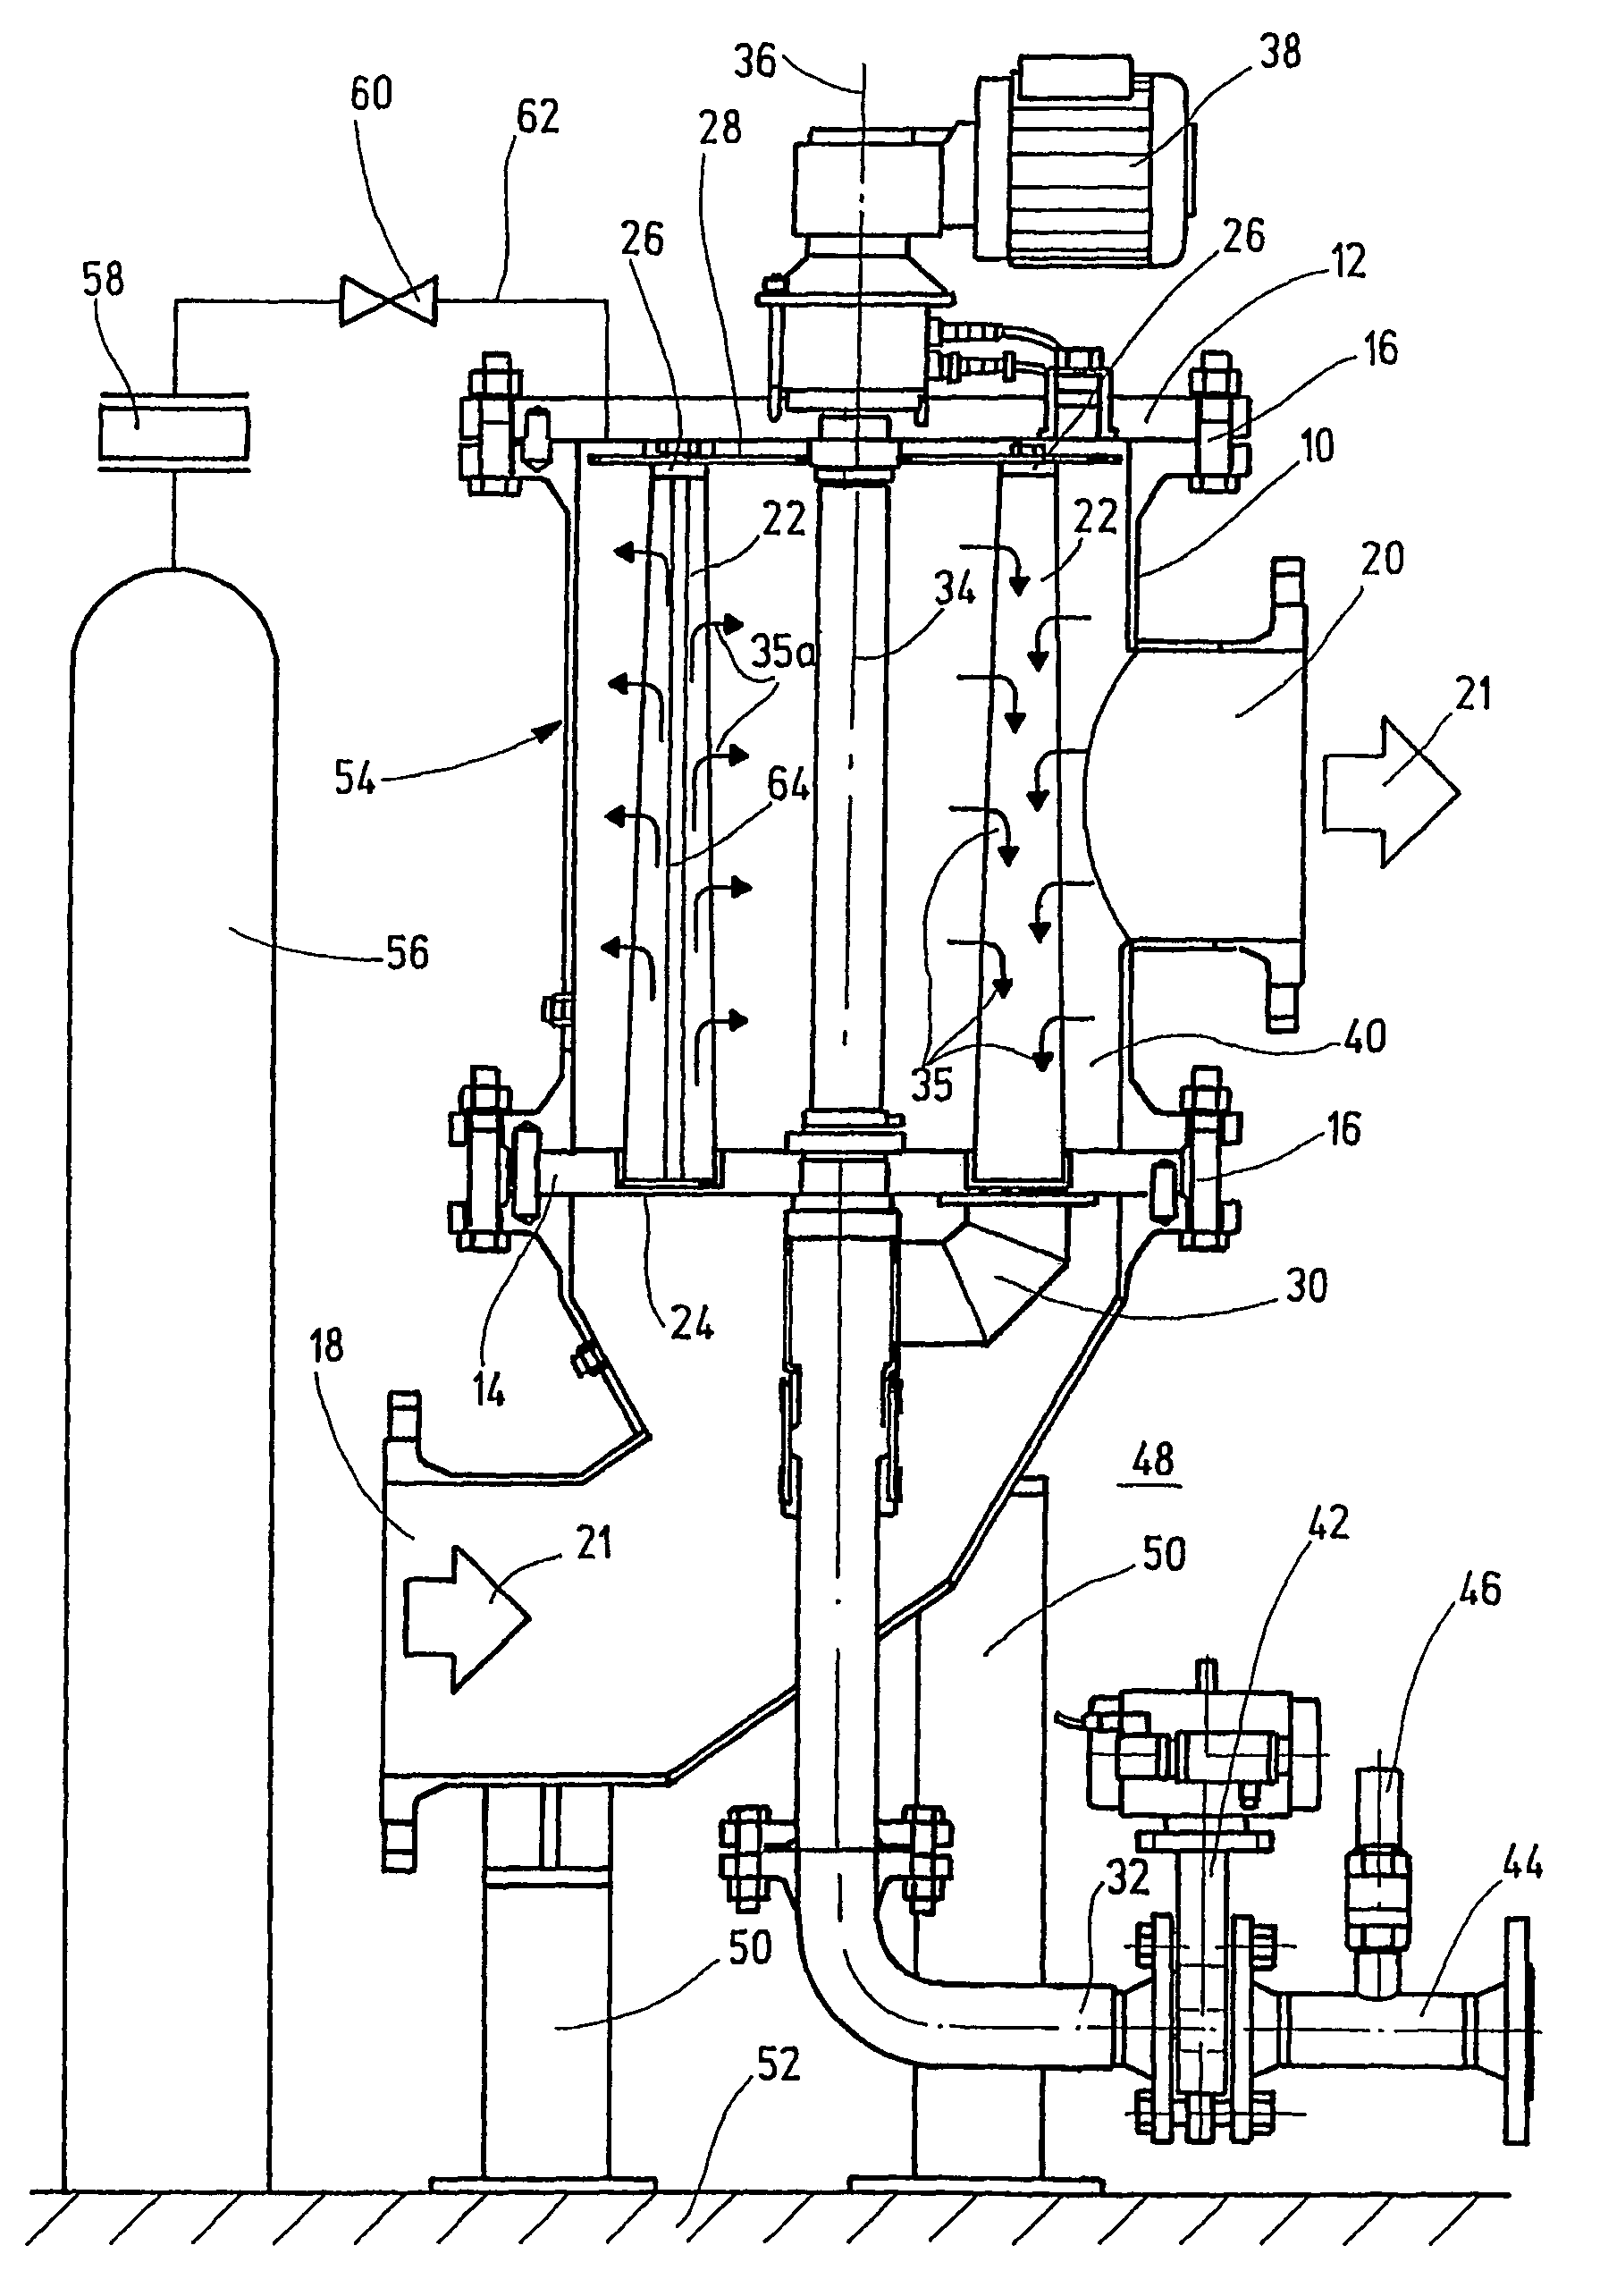 Filter installation and method for operating one such filter installation